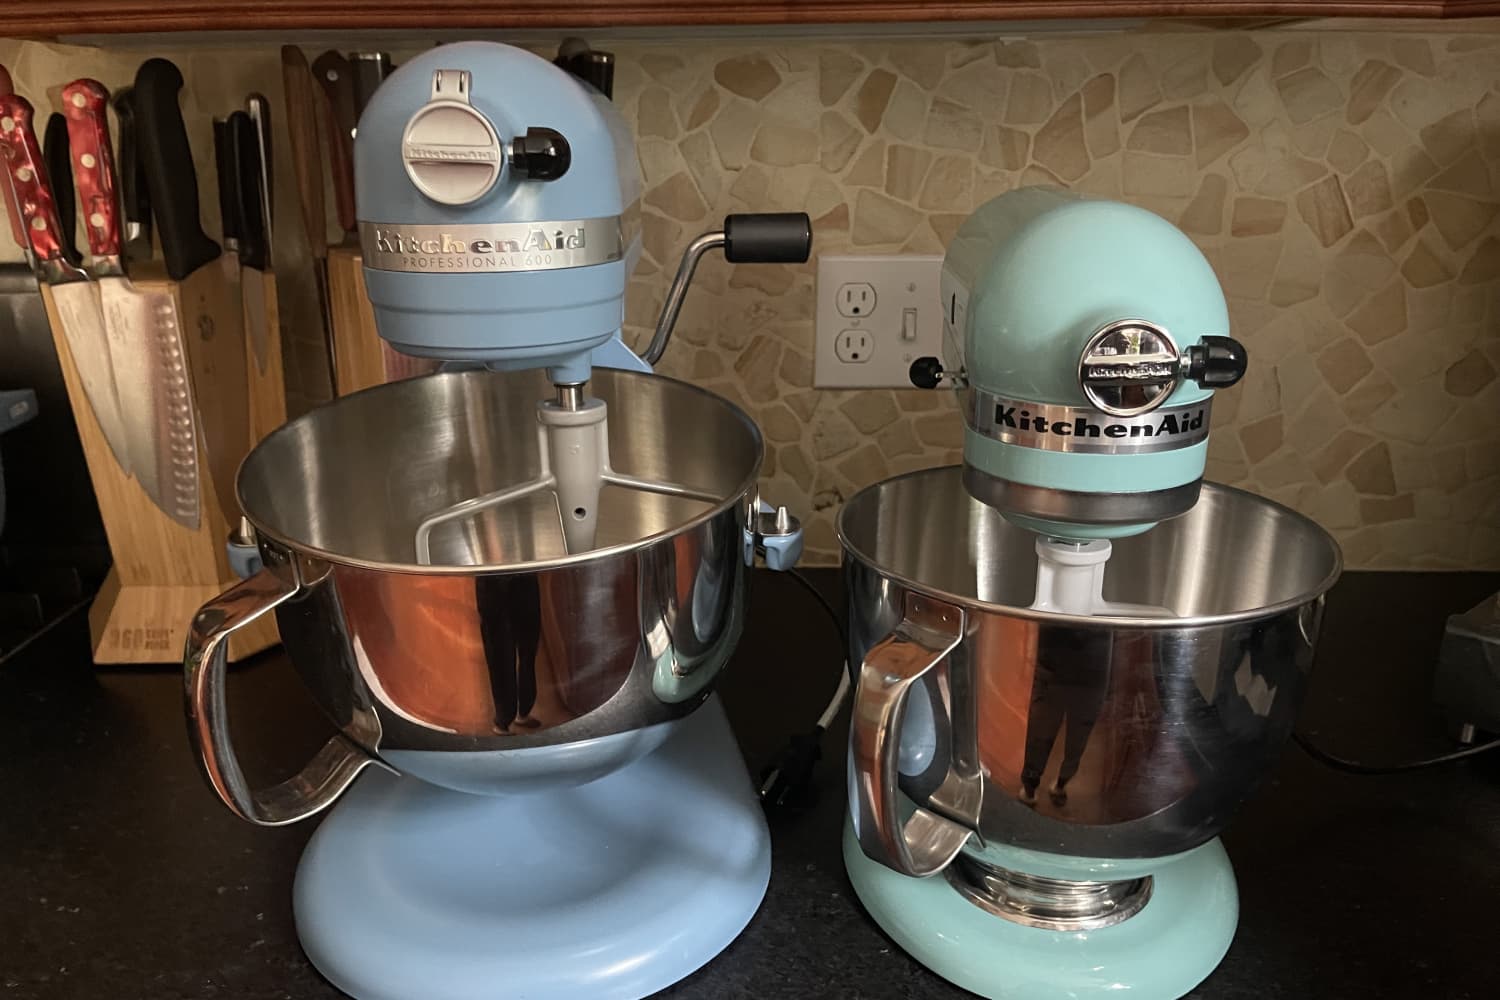 5 Questions to Ask Yourself Before Buying a KitchenAid (or Any Stand Mixer)